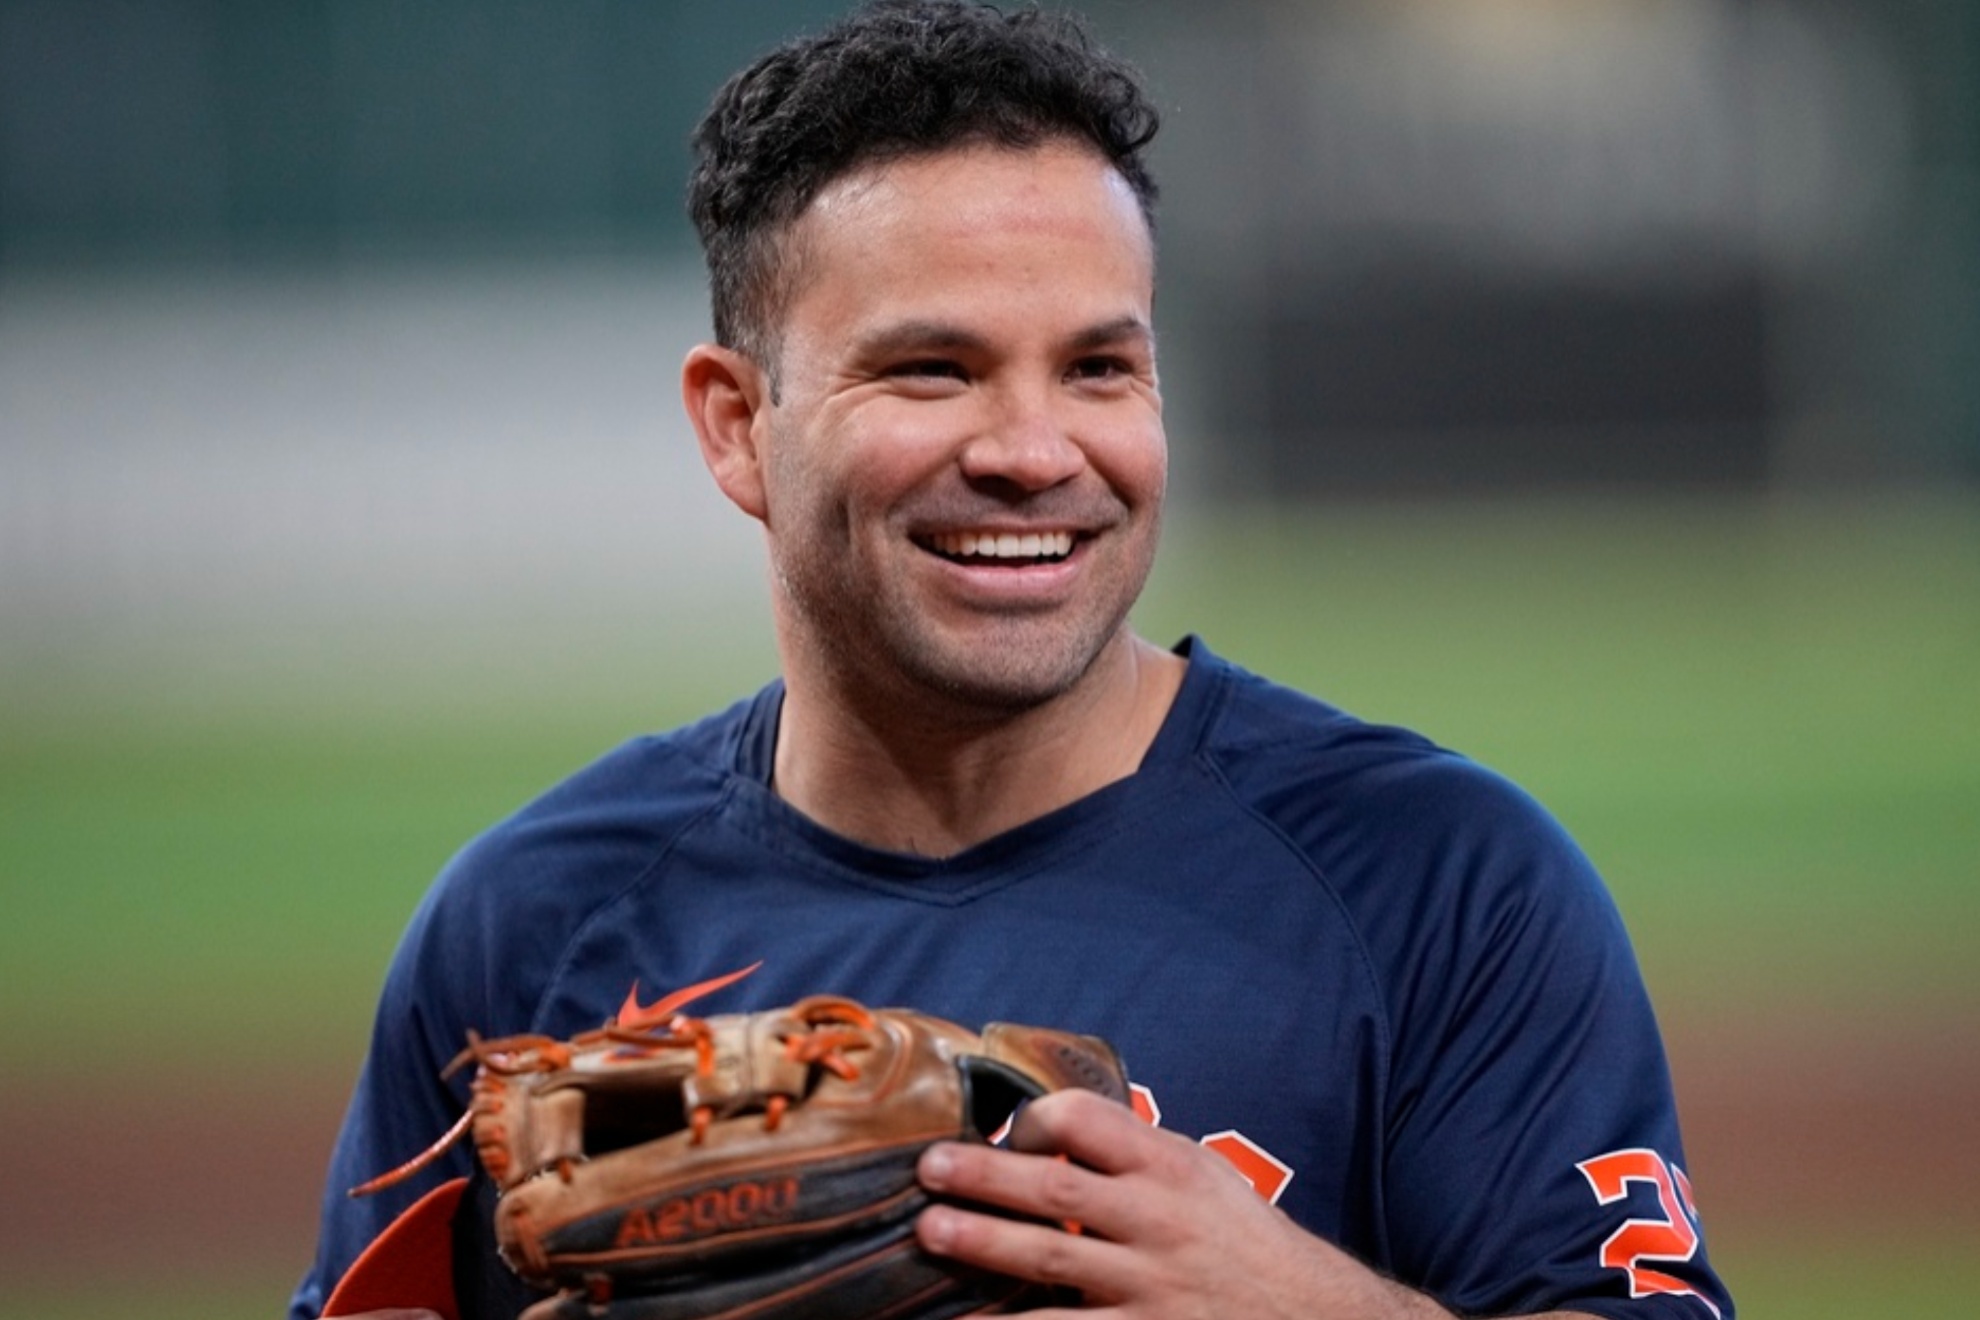 Jose Altuve will remain with the Houston Astros for the rest of his MLB career